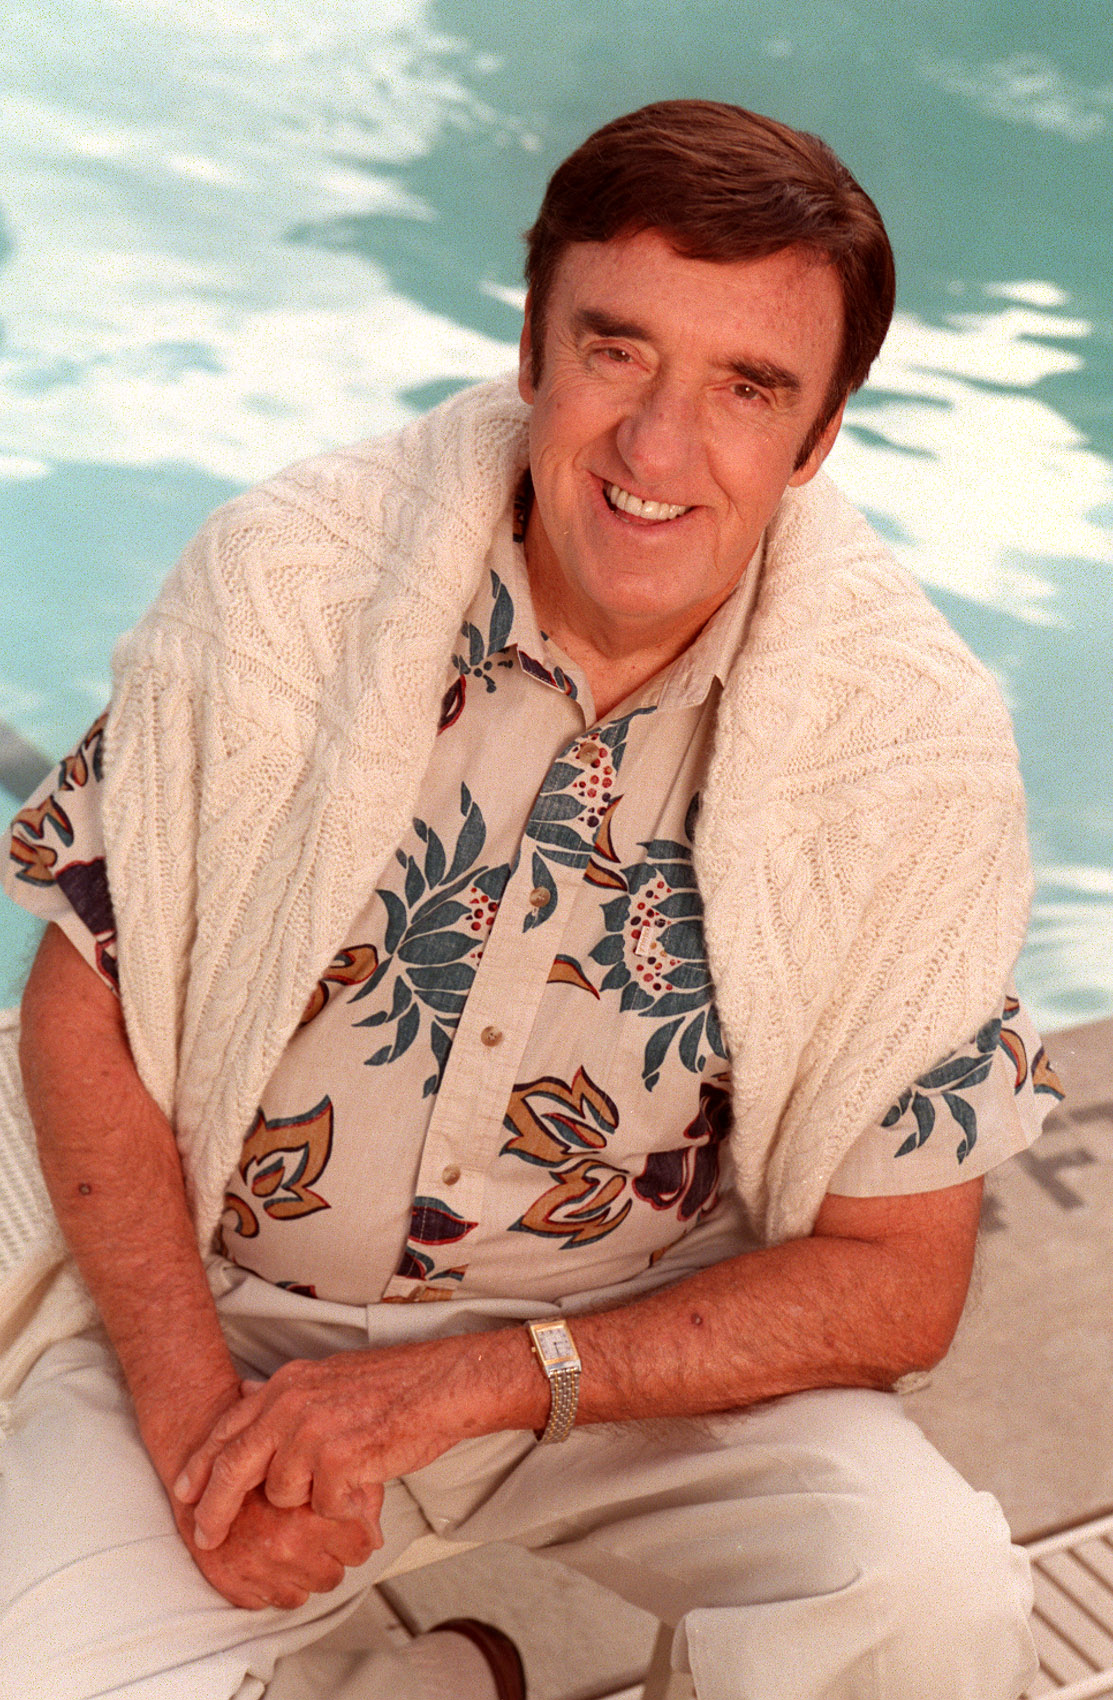 Jim Nabors in Beverly Hills in 2000 | Source: Getty Images